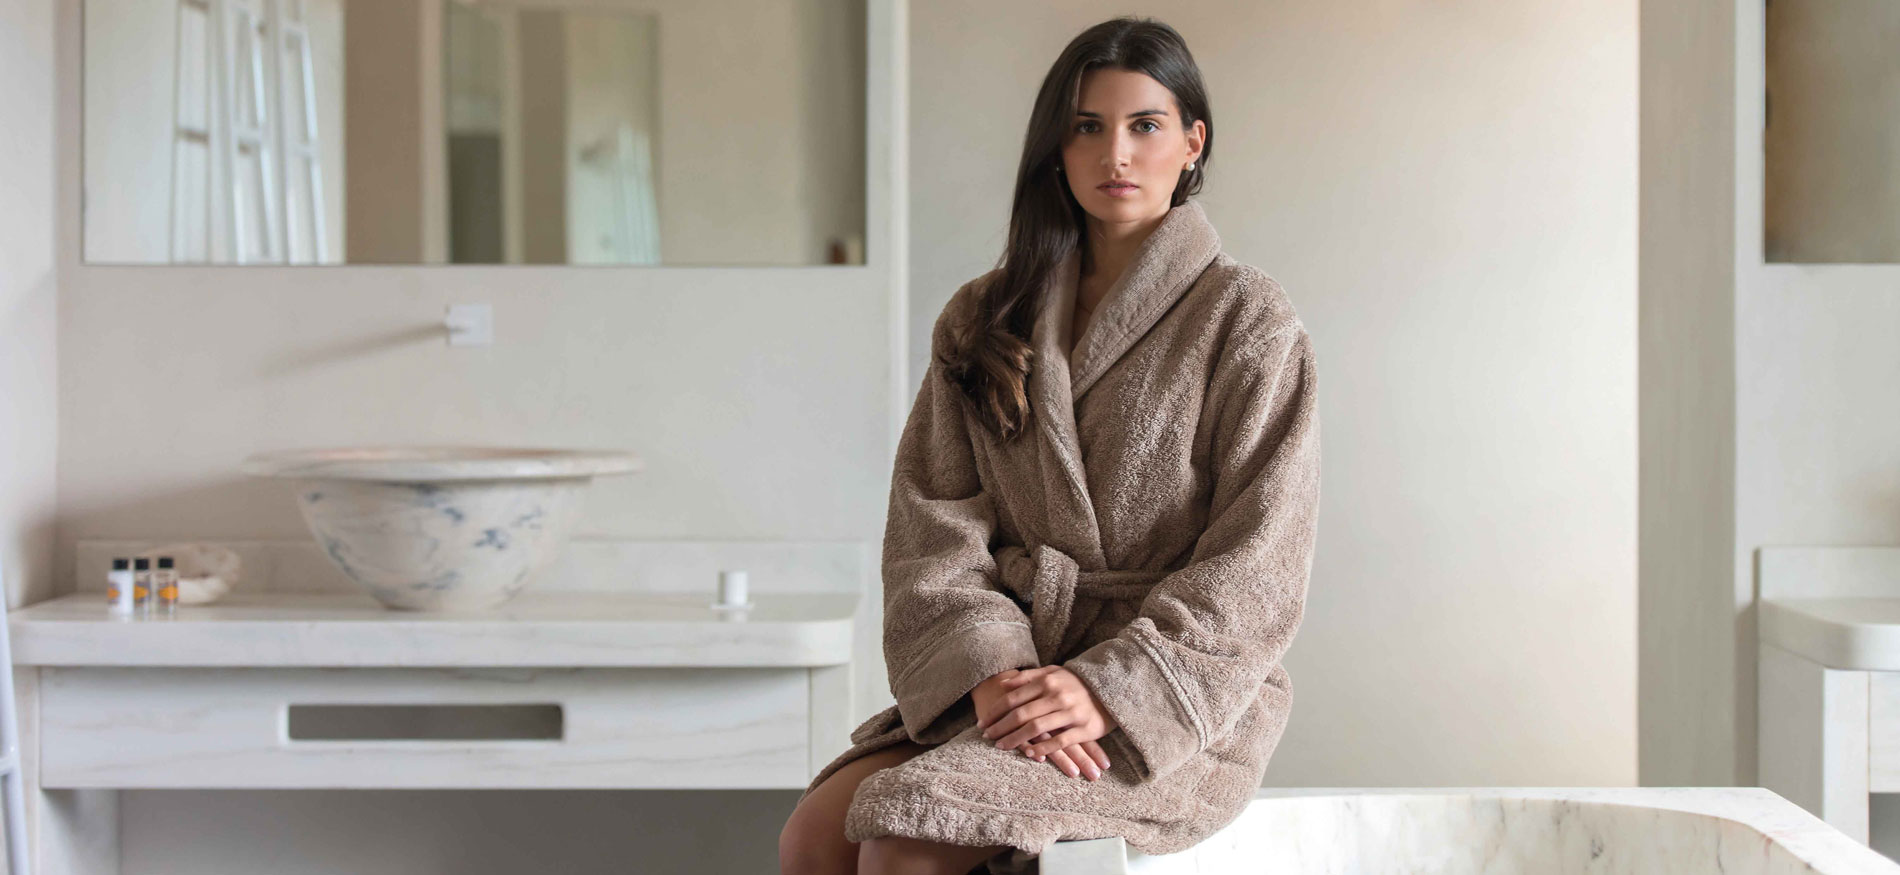 Graccioza Bathrobes from finest cotton in exclusive design and workmanship from Portugal